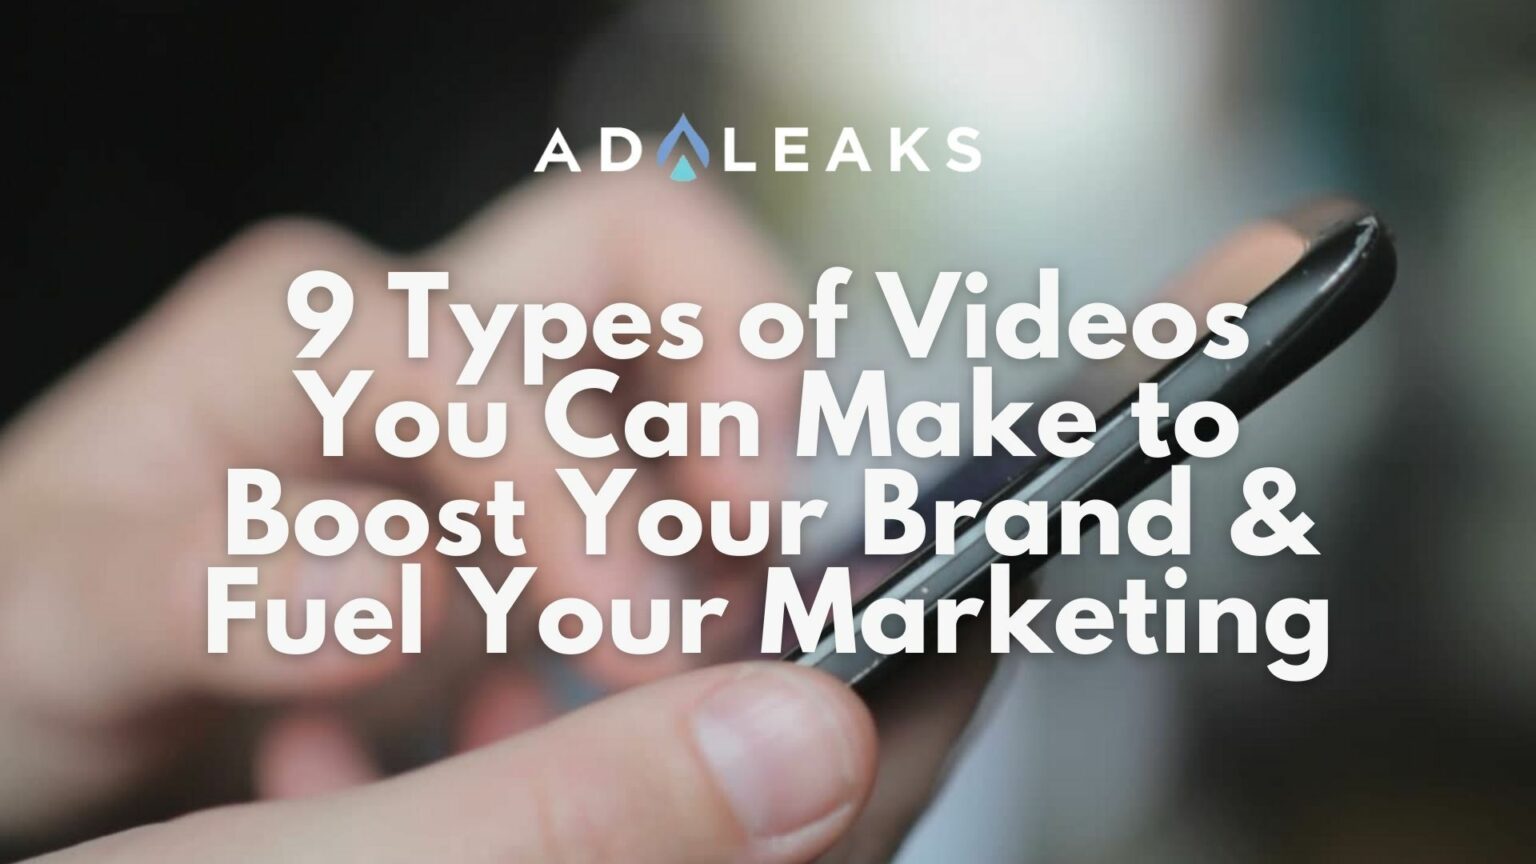 9 Types of Videos You Can Make to Boost Your Brand & Fuel Your Marketing